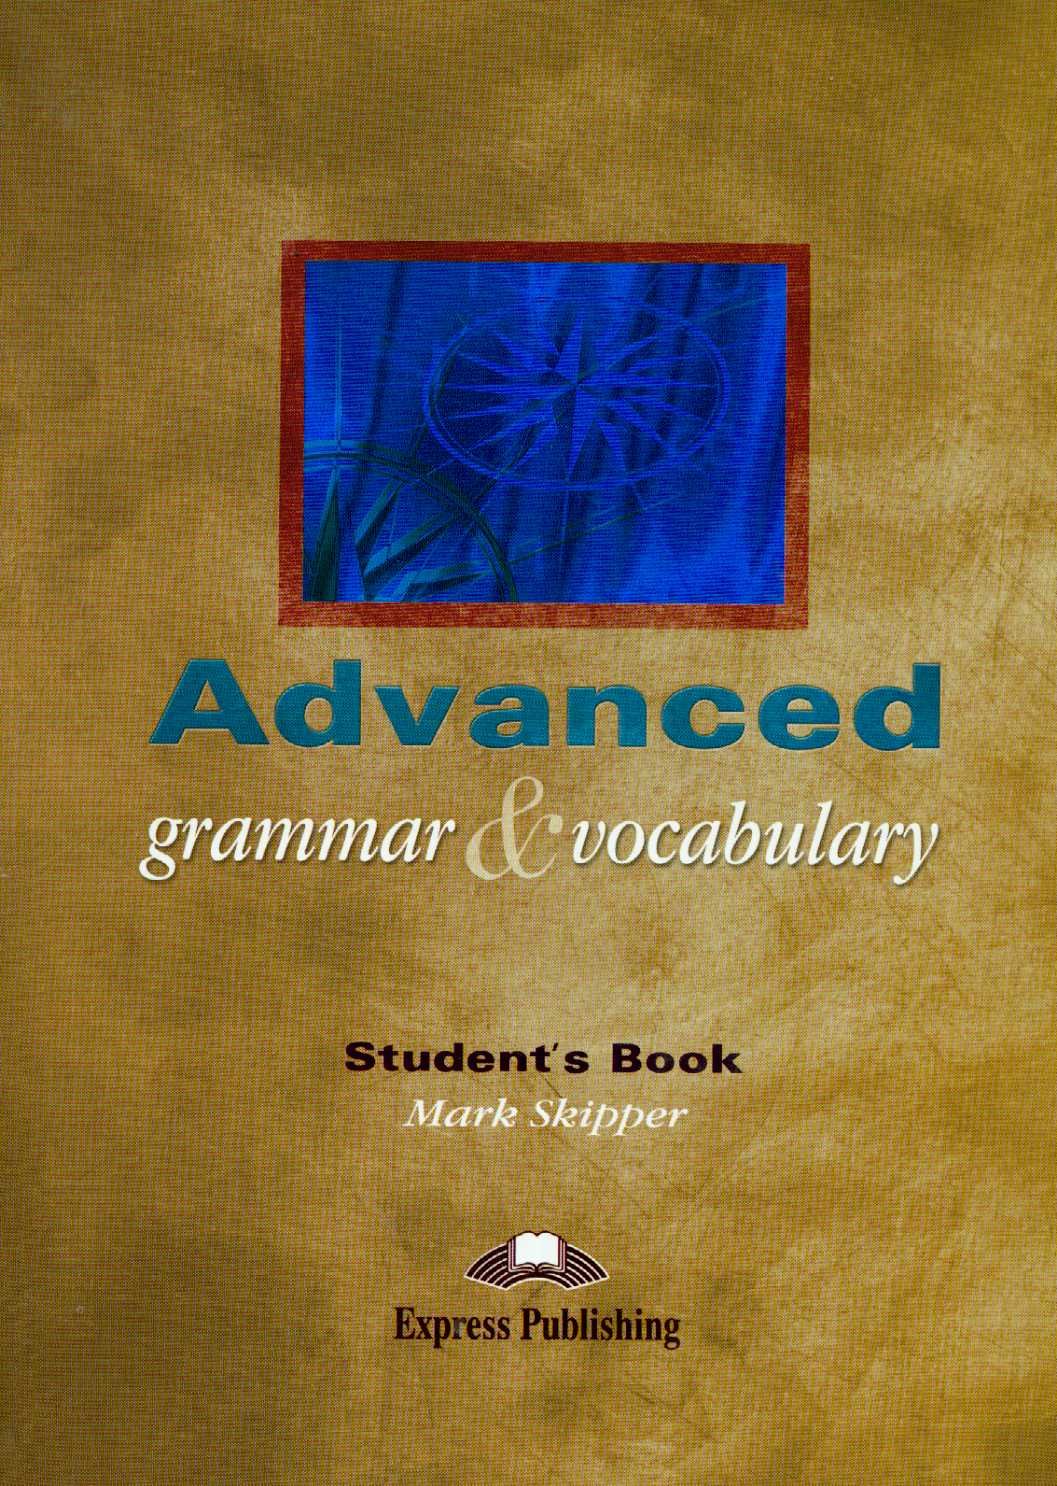 ADVANCED GRAMMAR AND VOCABULARY Student's Book